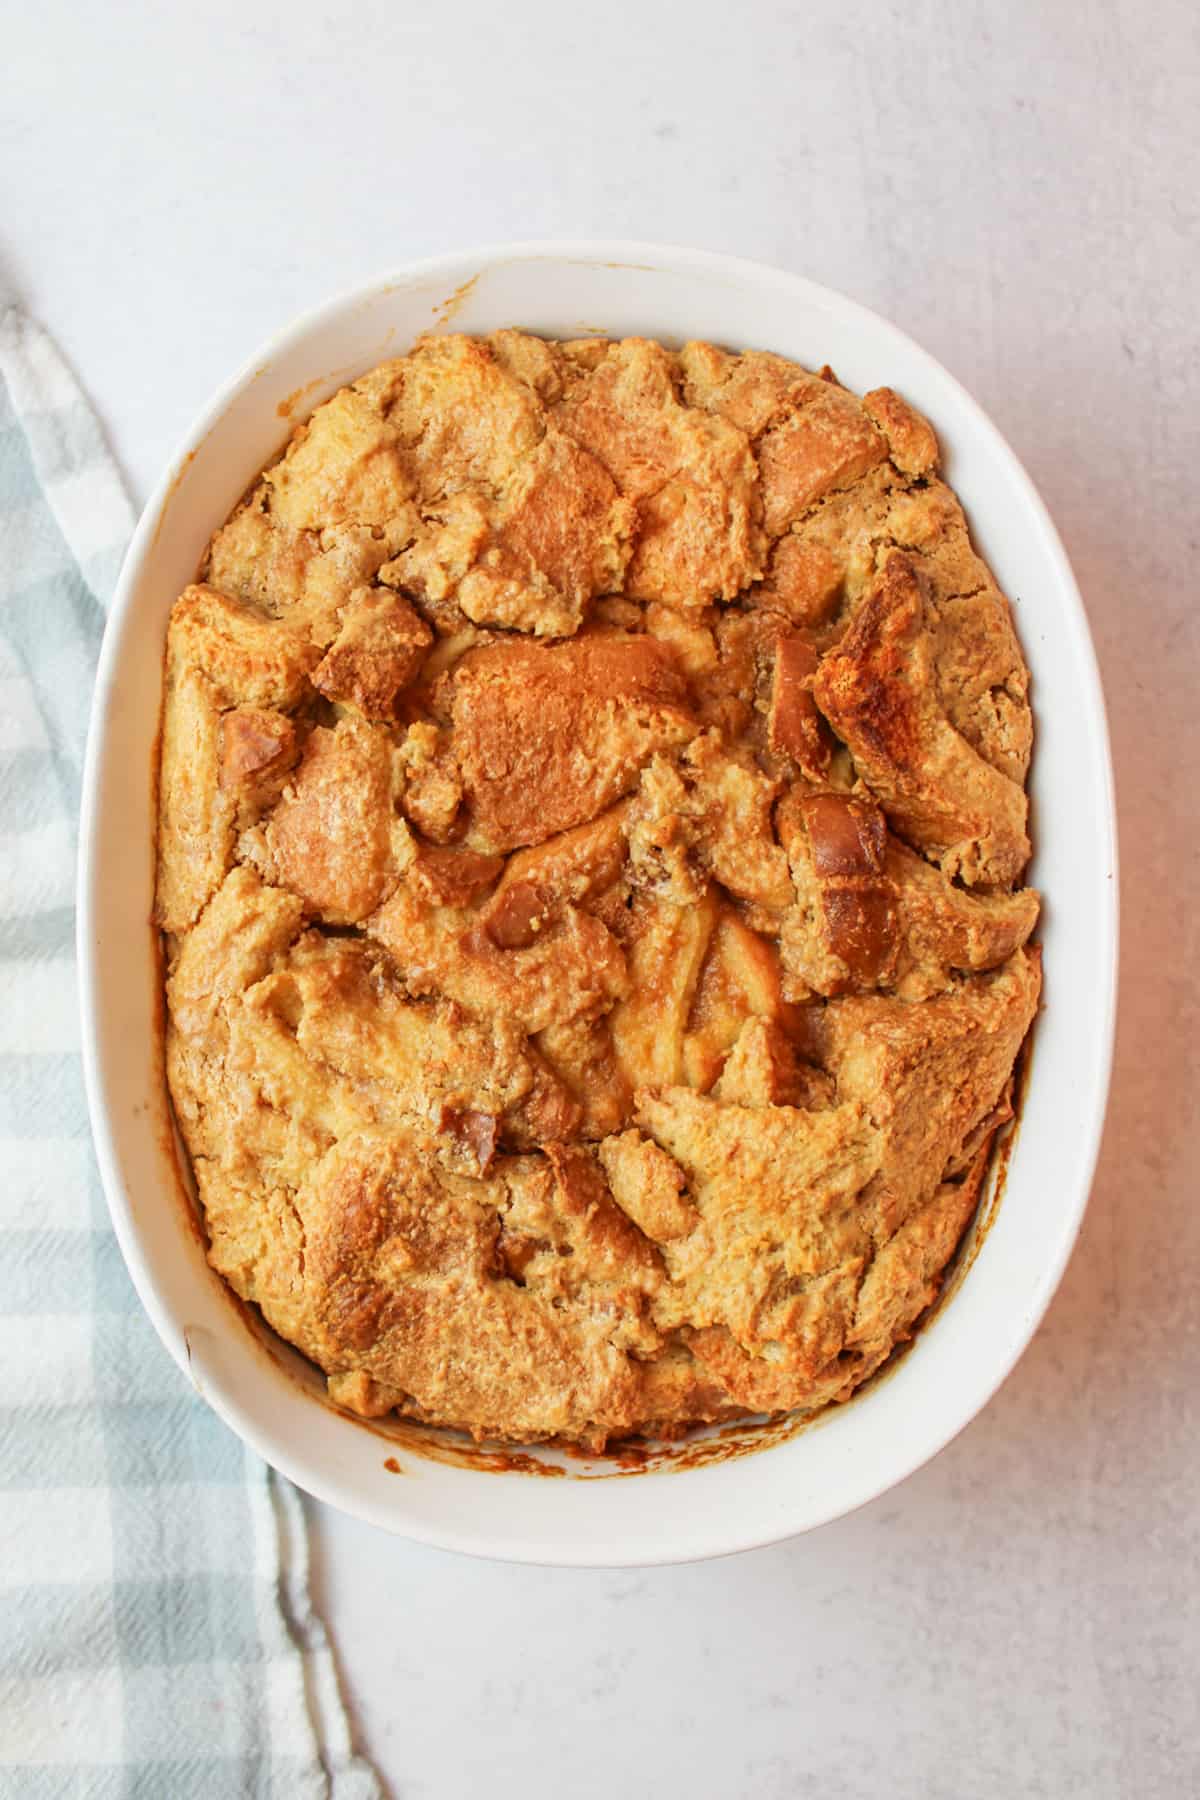 baked peanut butter bread pudding in an oval baking dish